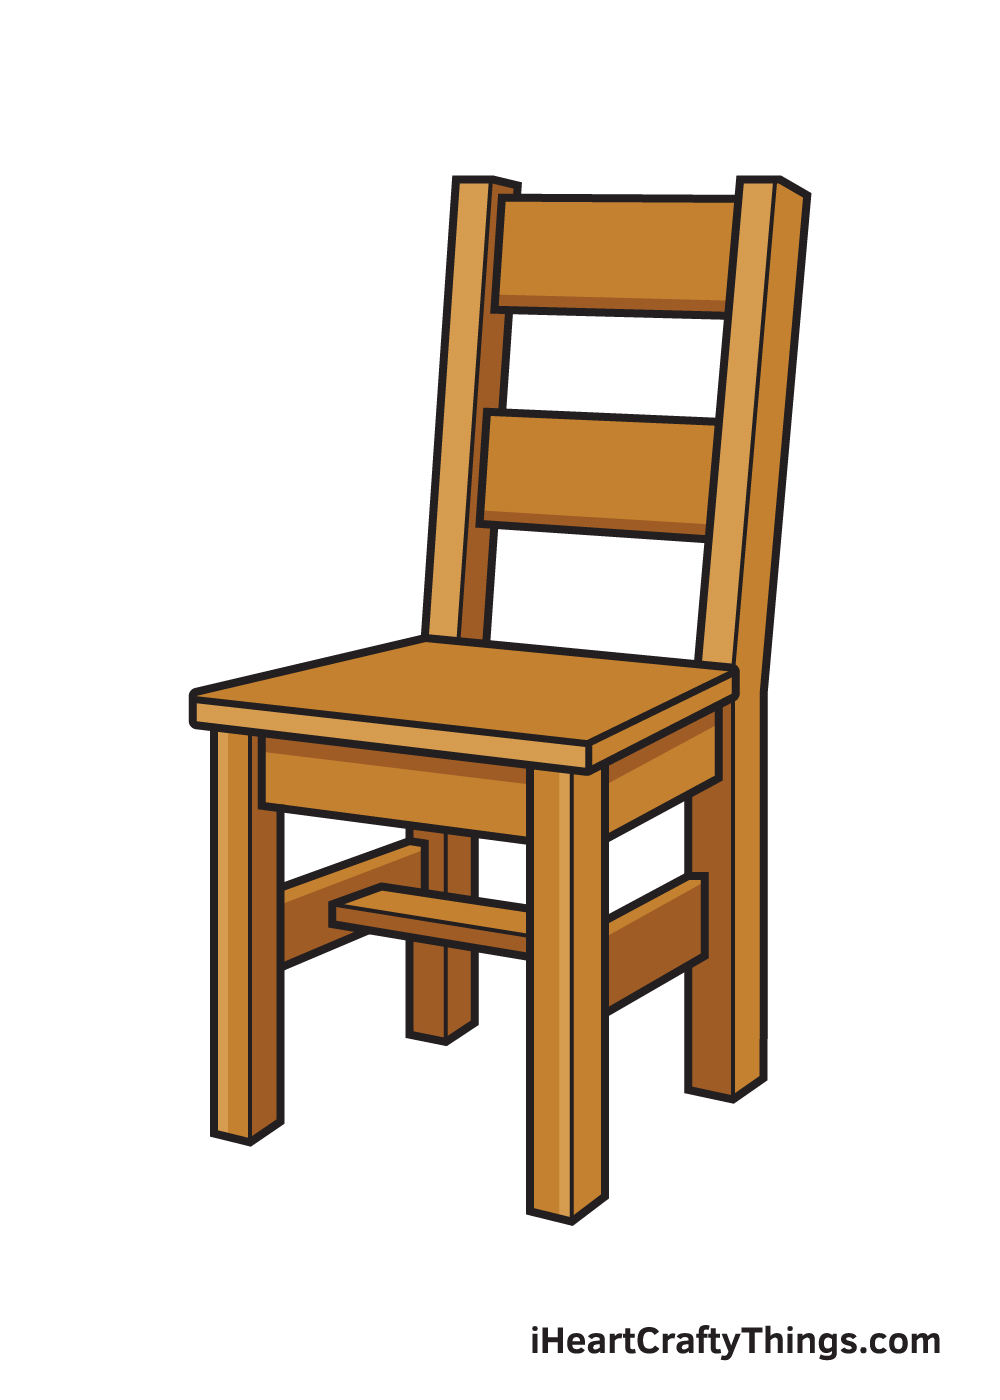 Top How To Draw A Chair From Behind in the world Learn more here 